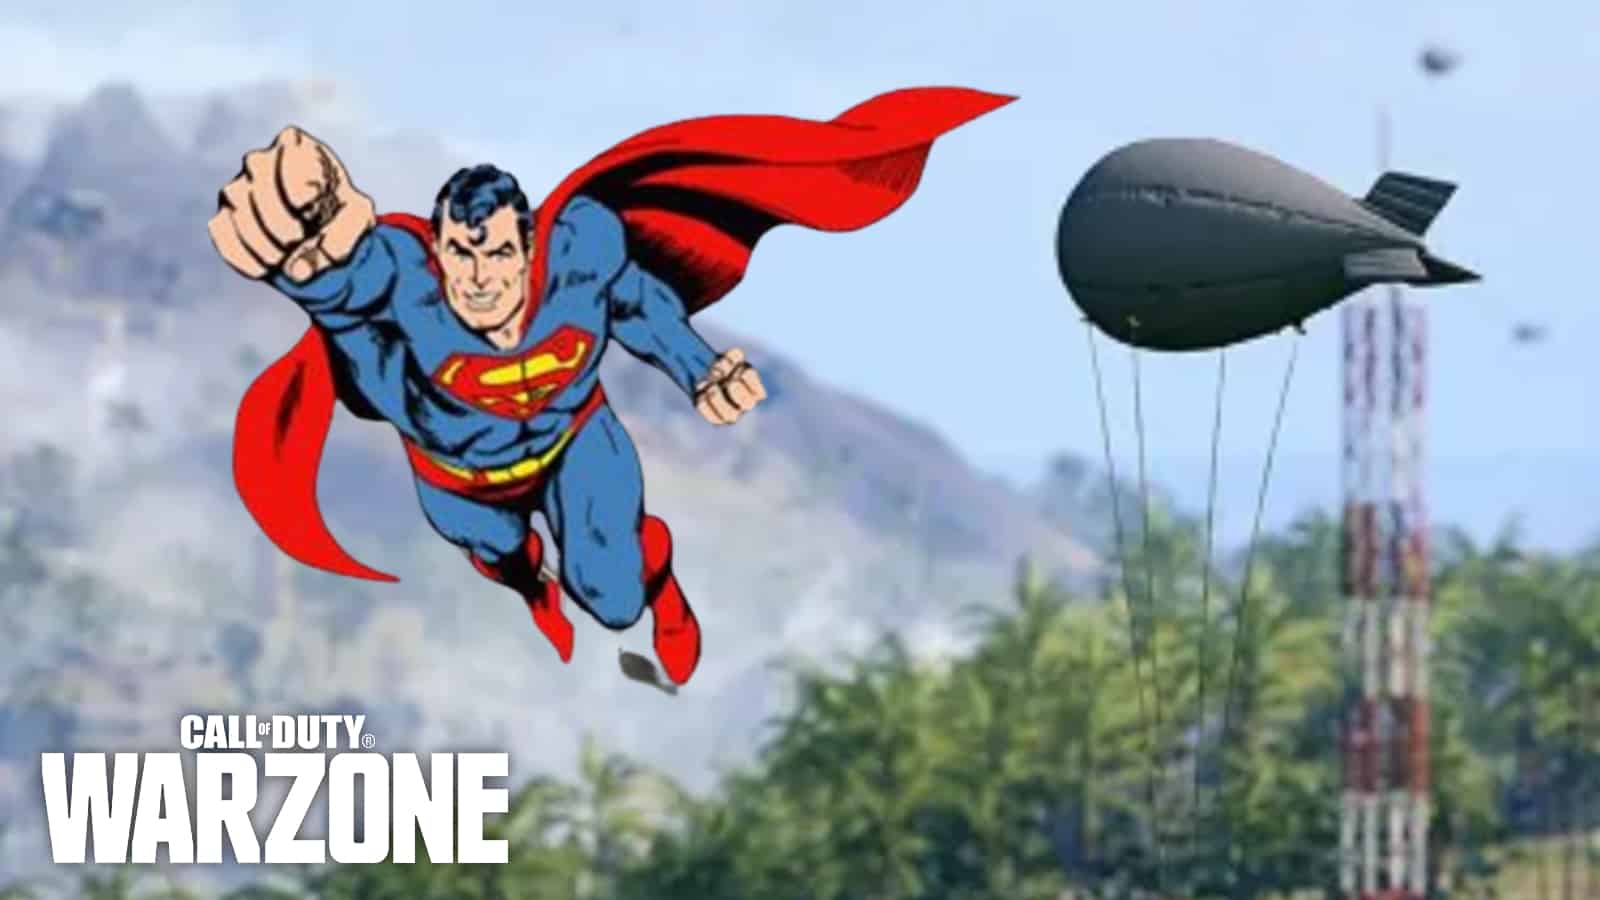 Warzone Redeploy Balloon glitch is giving players superhero mobility